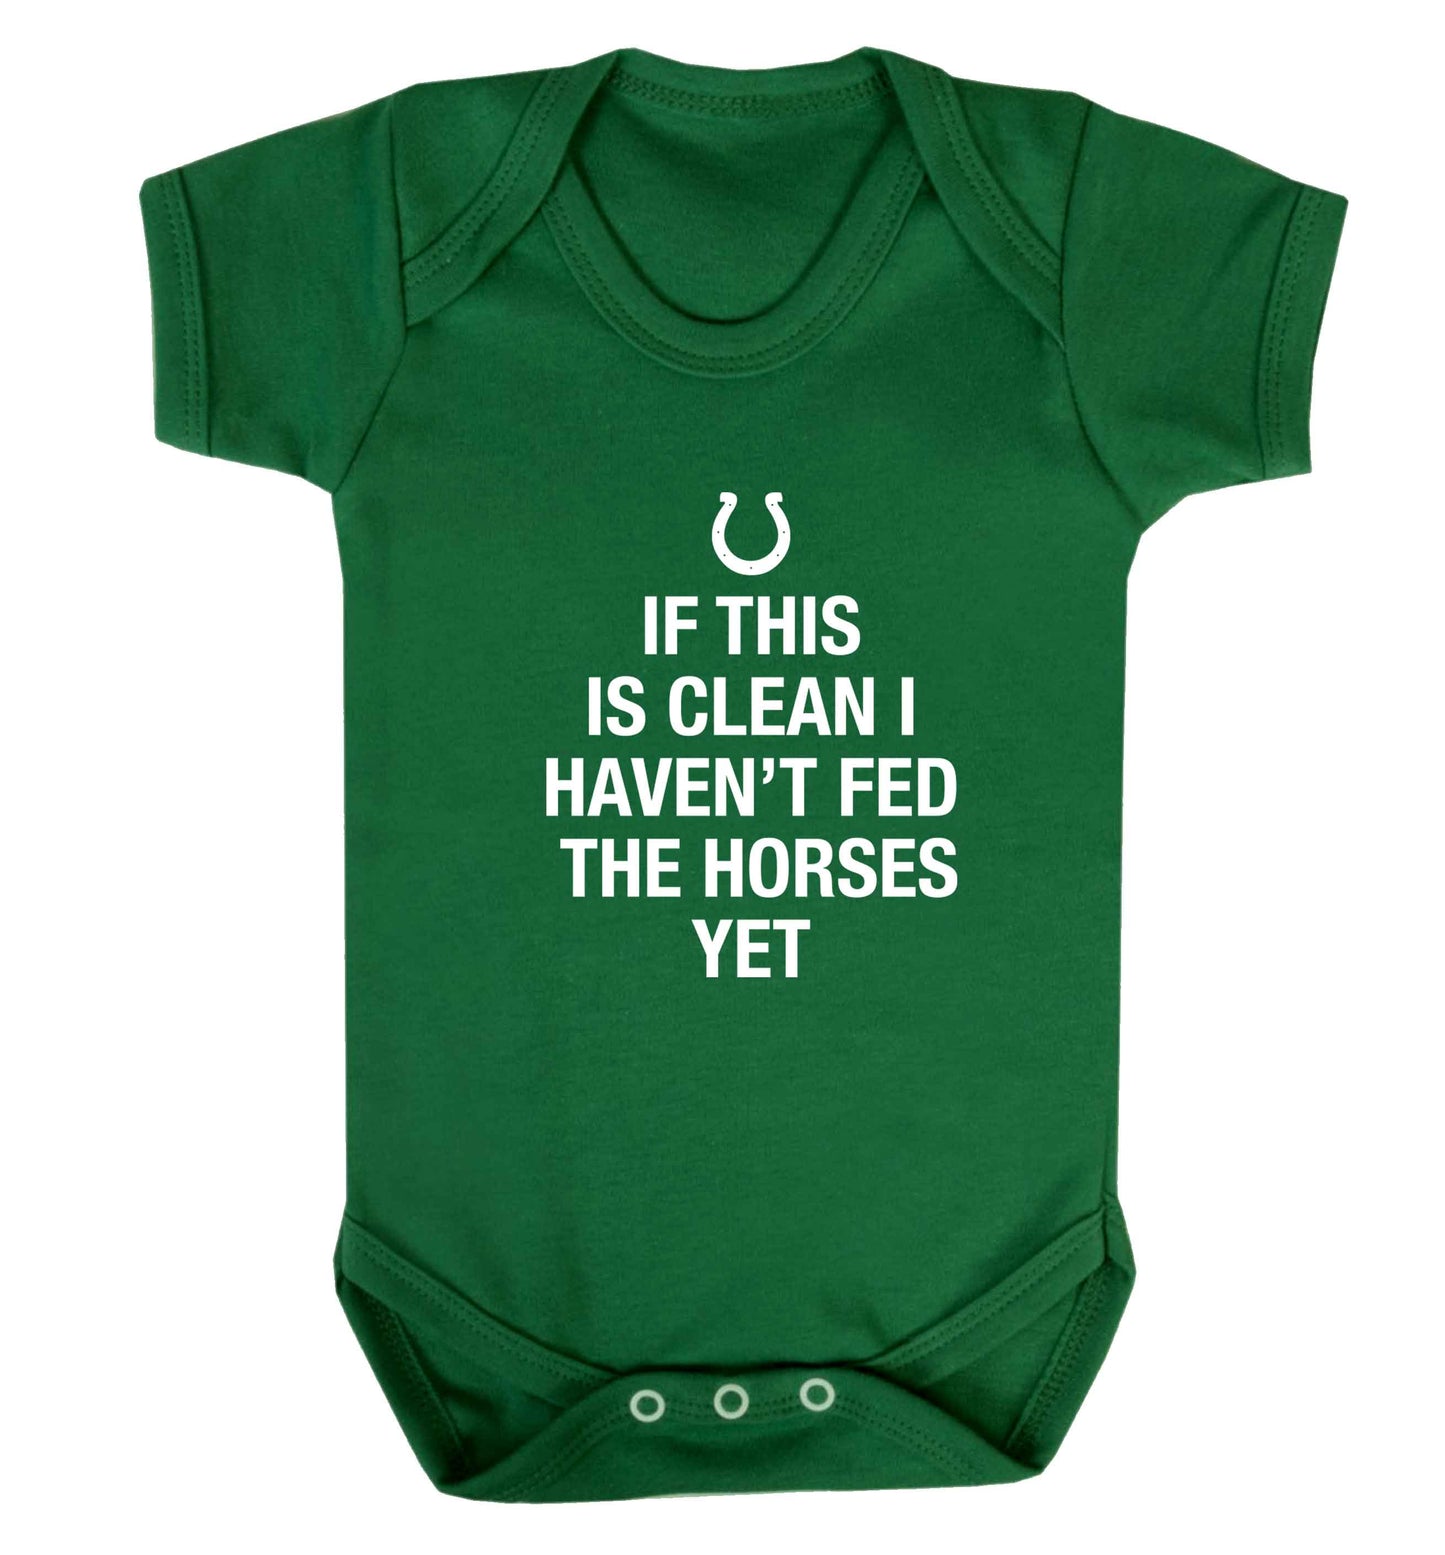 If this isn't clean I haven't fed the horses yet baby vest green 18-24 months